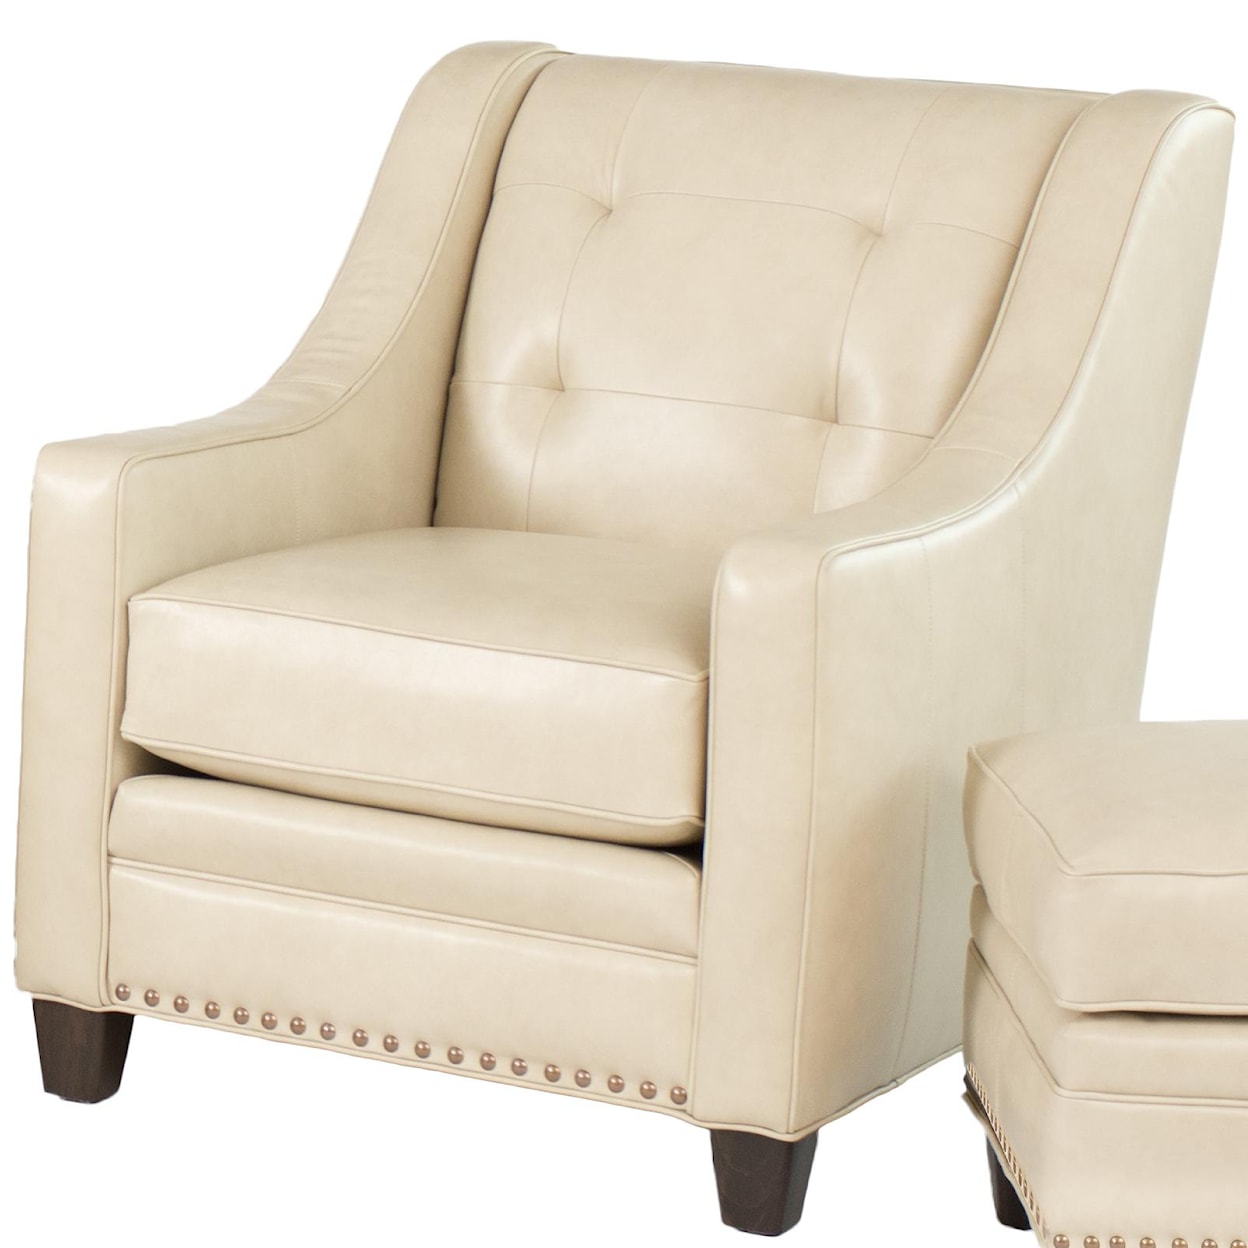 Smith Brothers 203 Transitional Stationary Chair